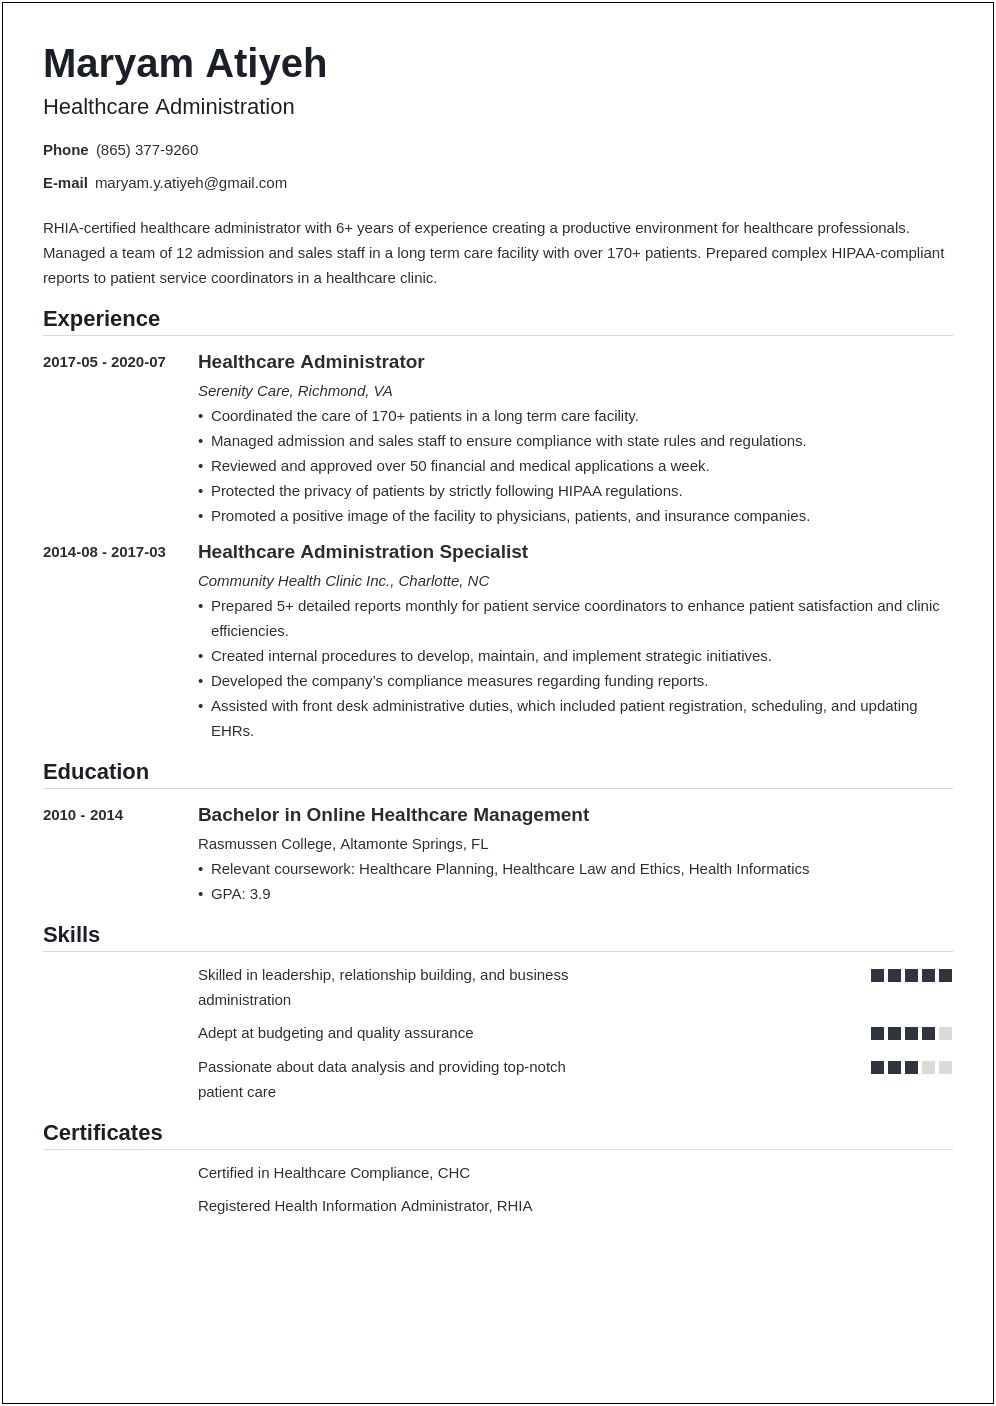 Technical Skills Resume In Healthcare Administration